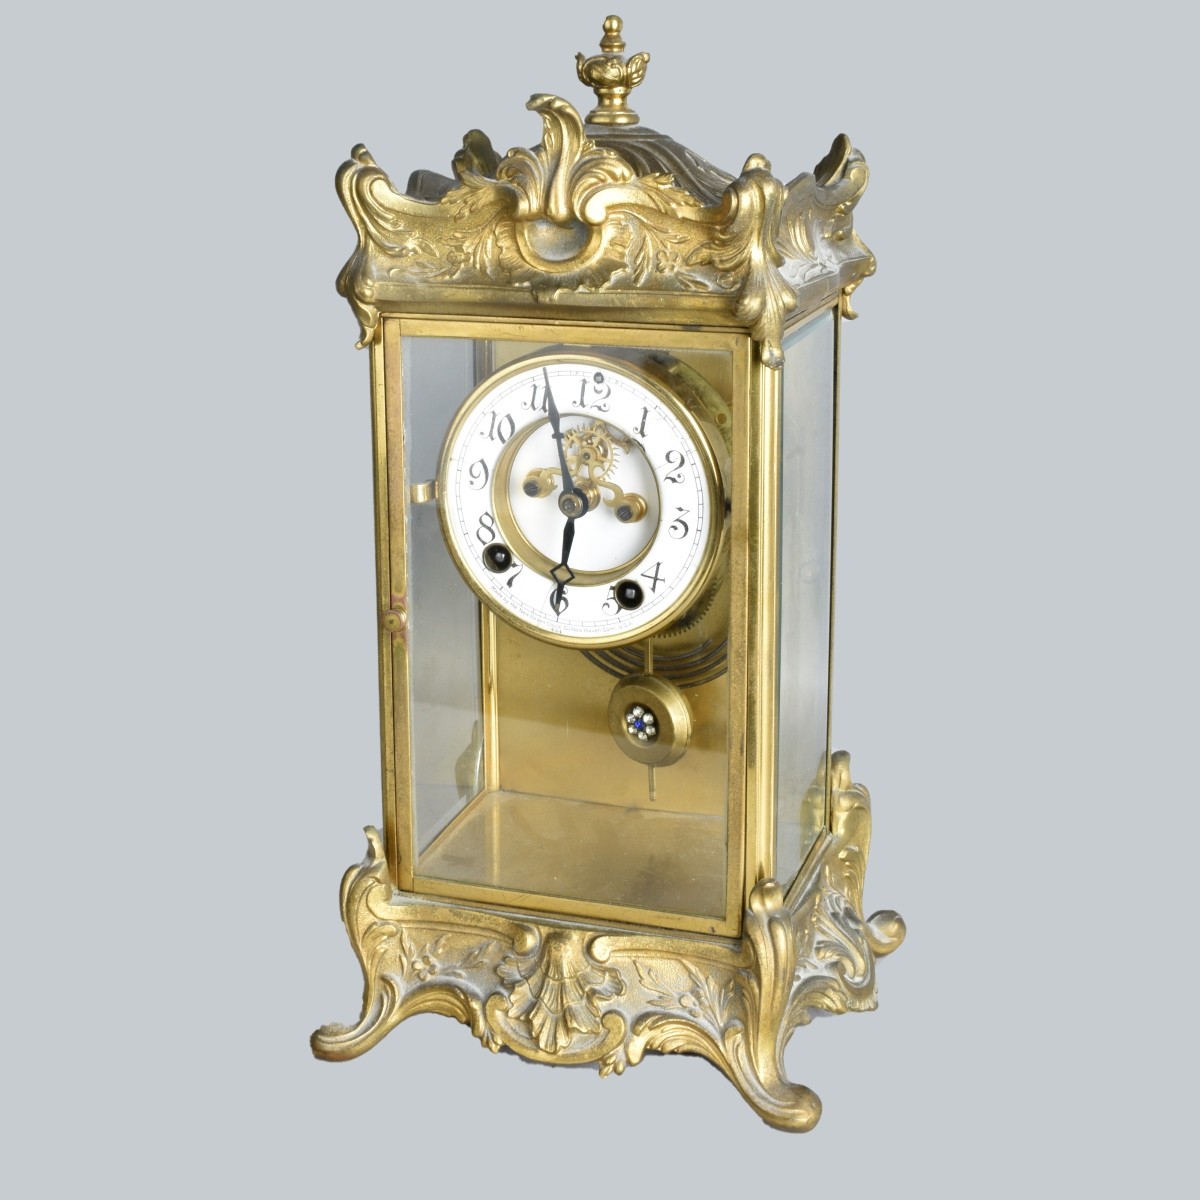 The New Haven Clock Co. Mantle Clock